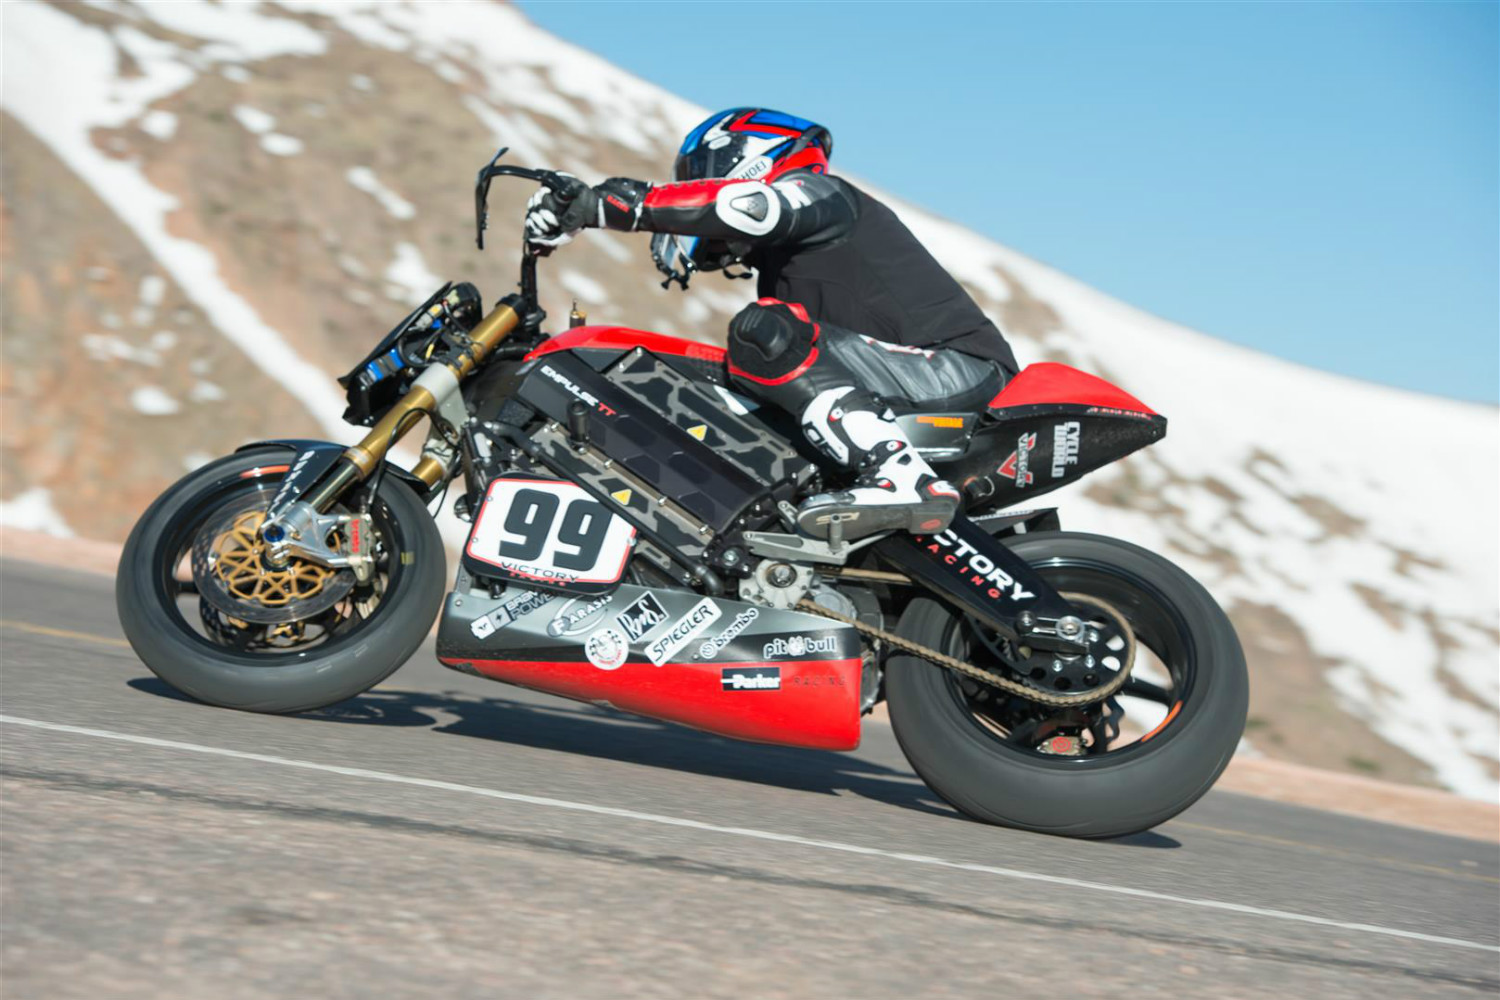 victory motorcycles empulse rr takes first at pikes peak